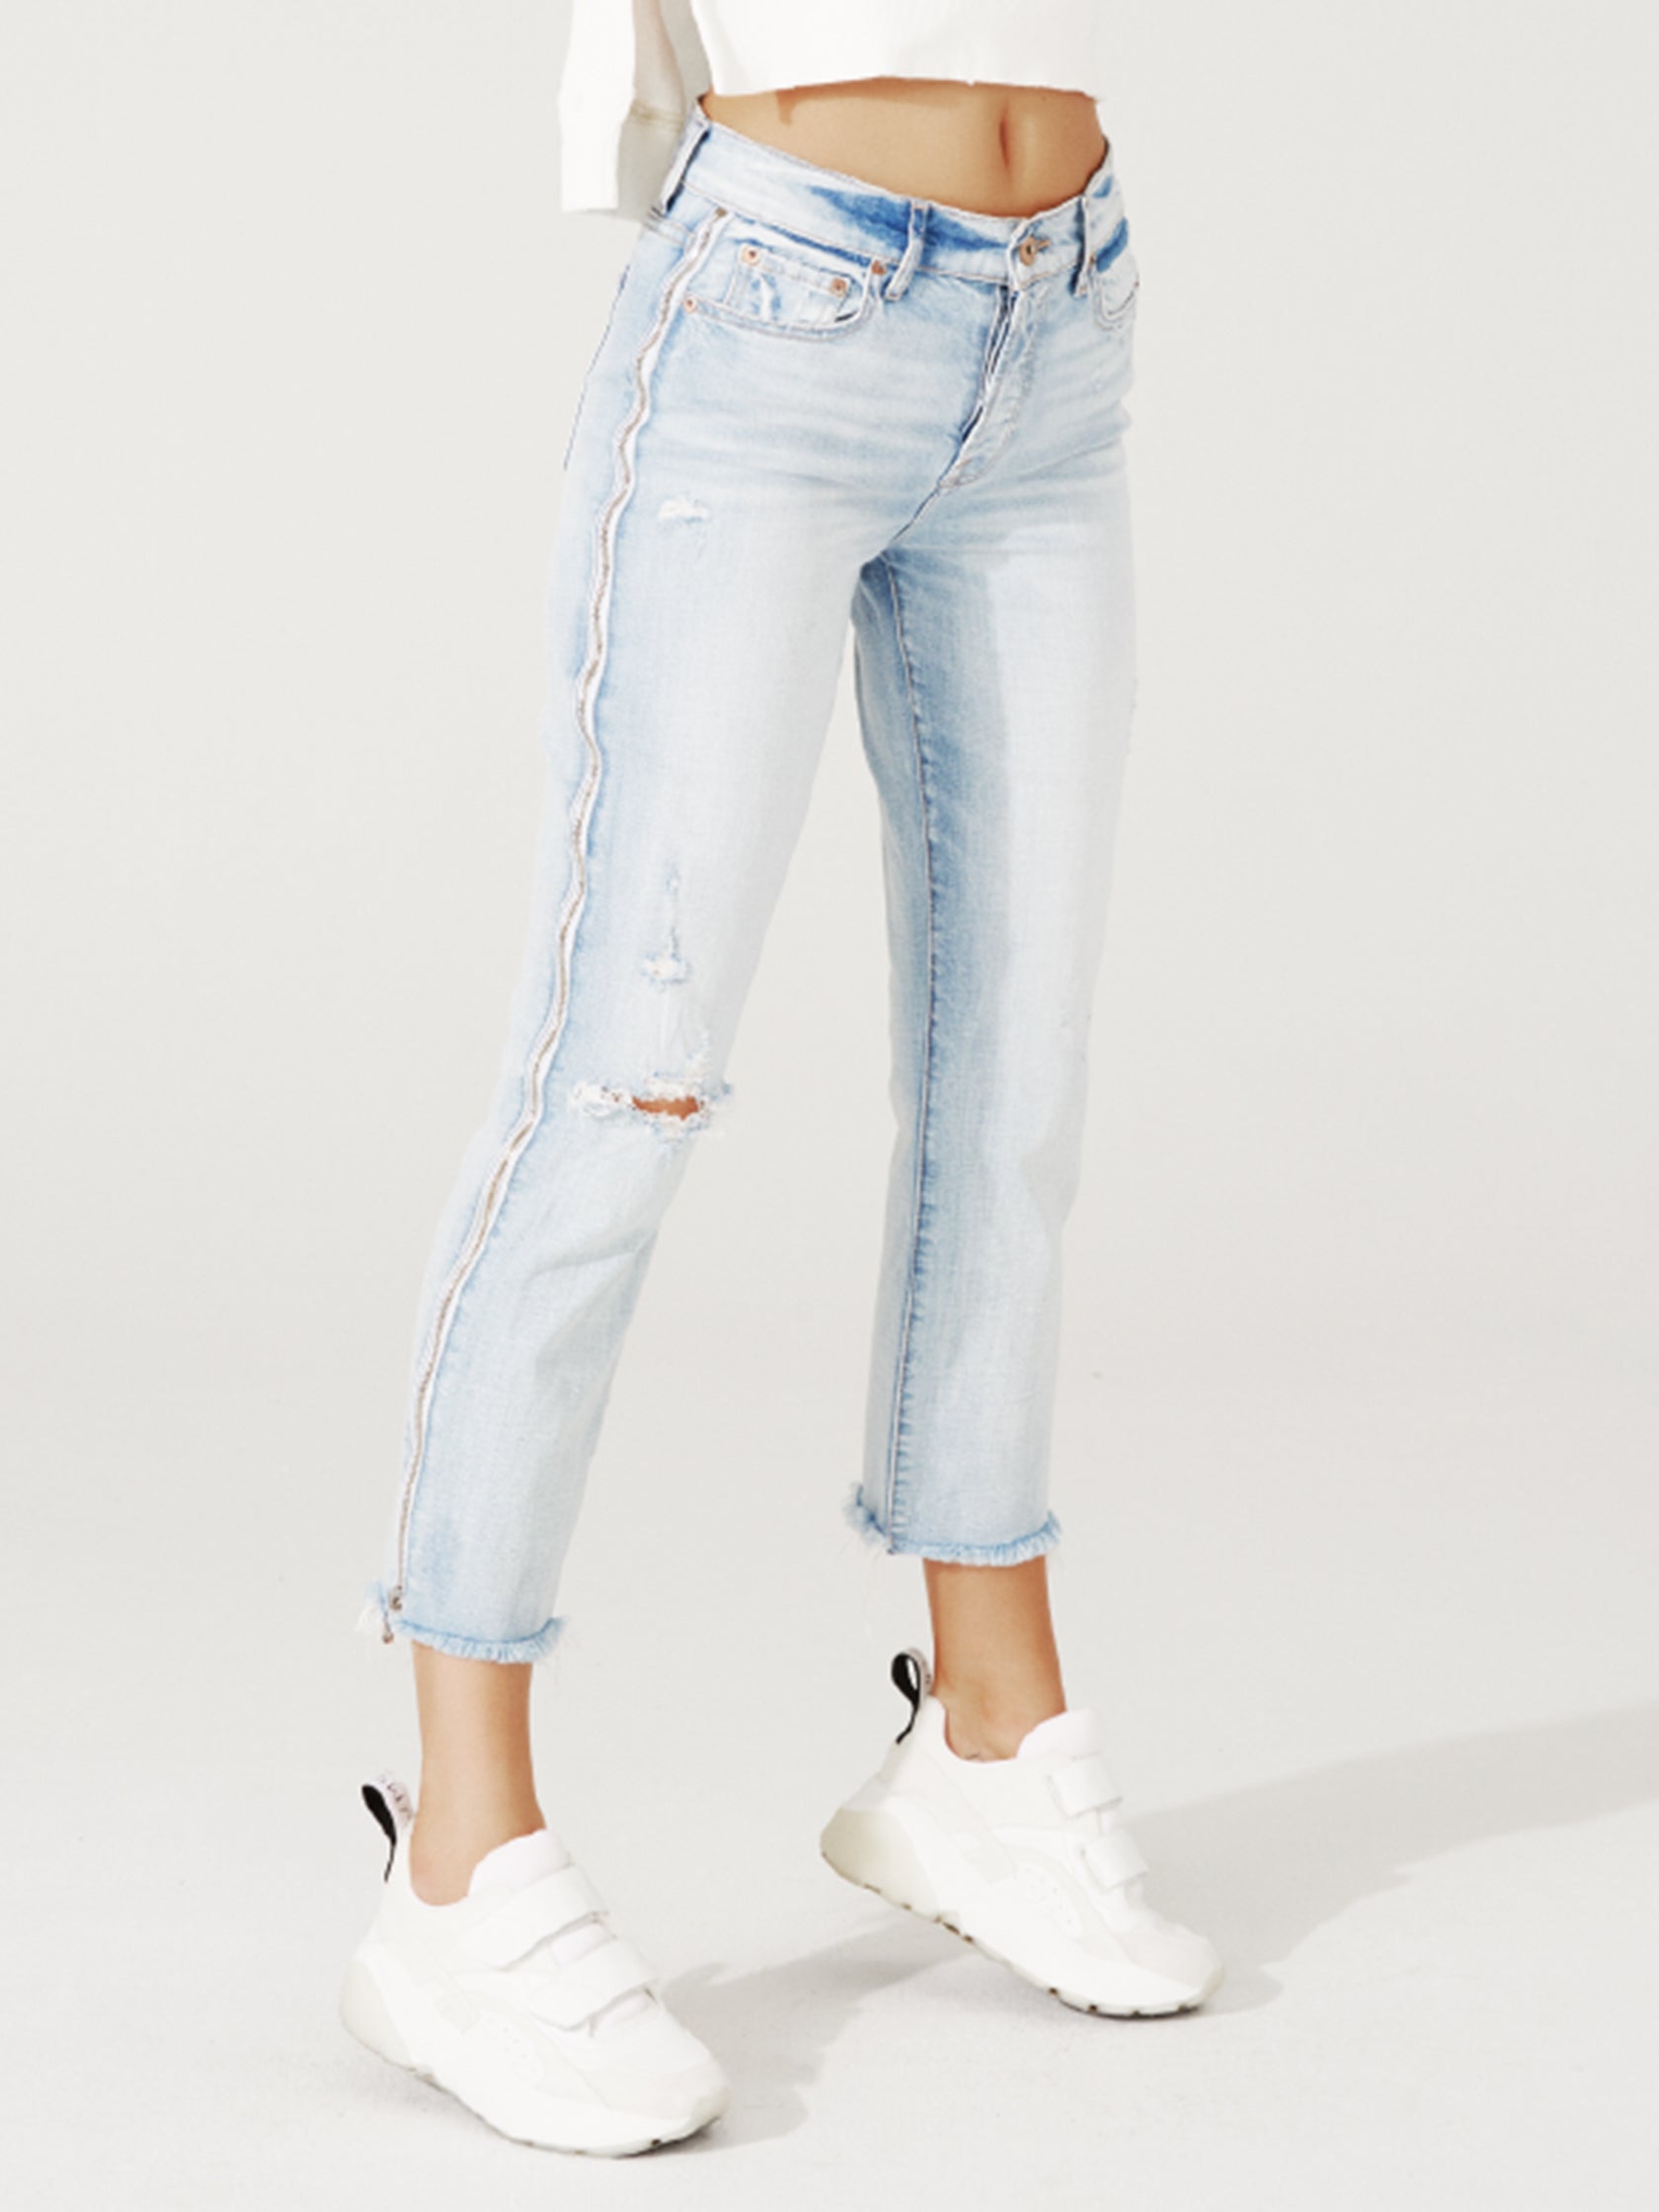 nautica relaxed fit stretch jeans